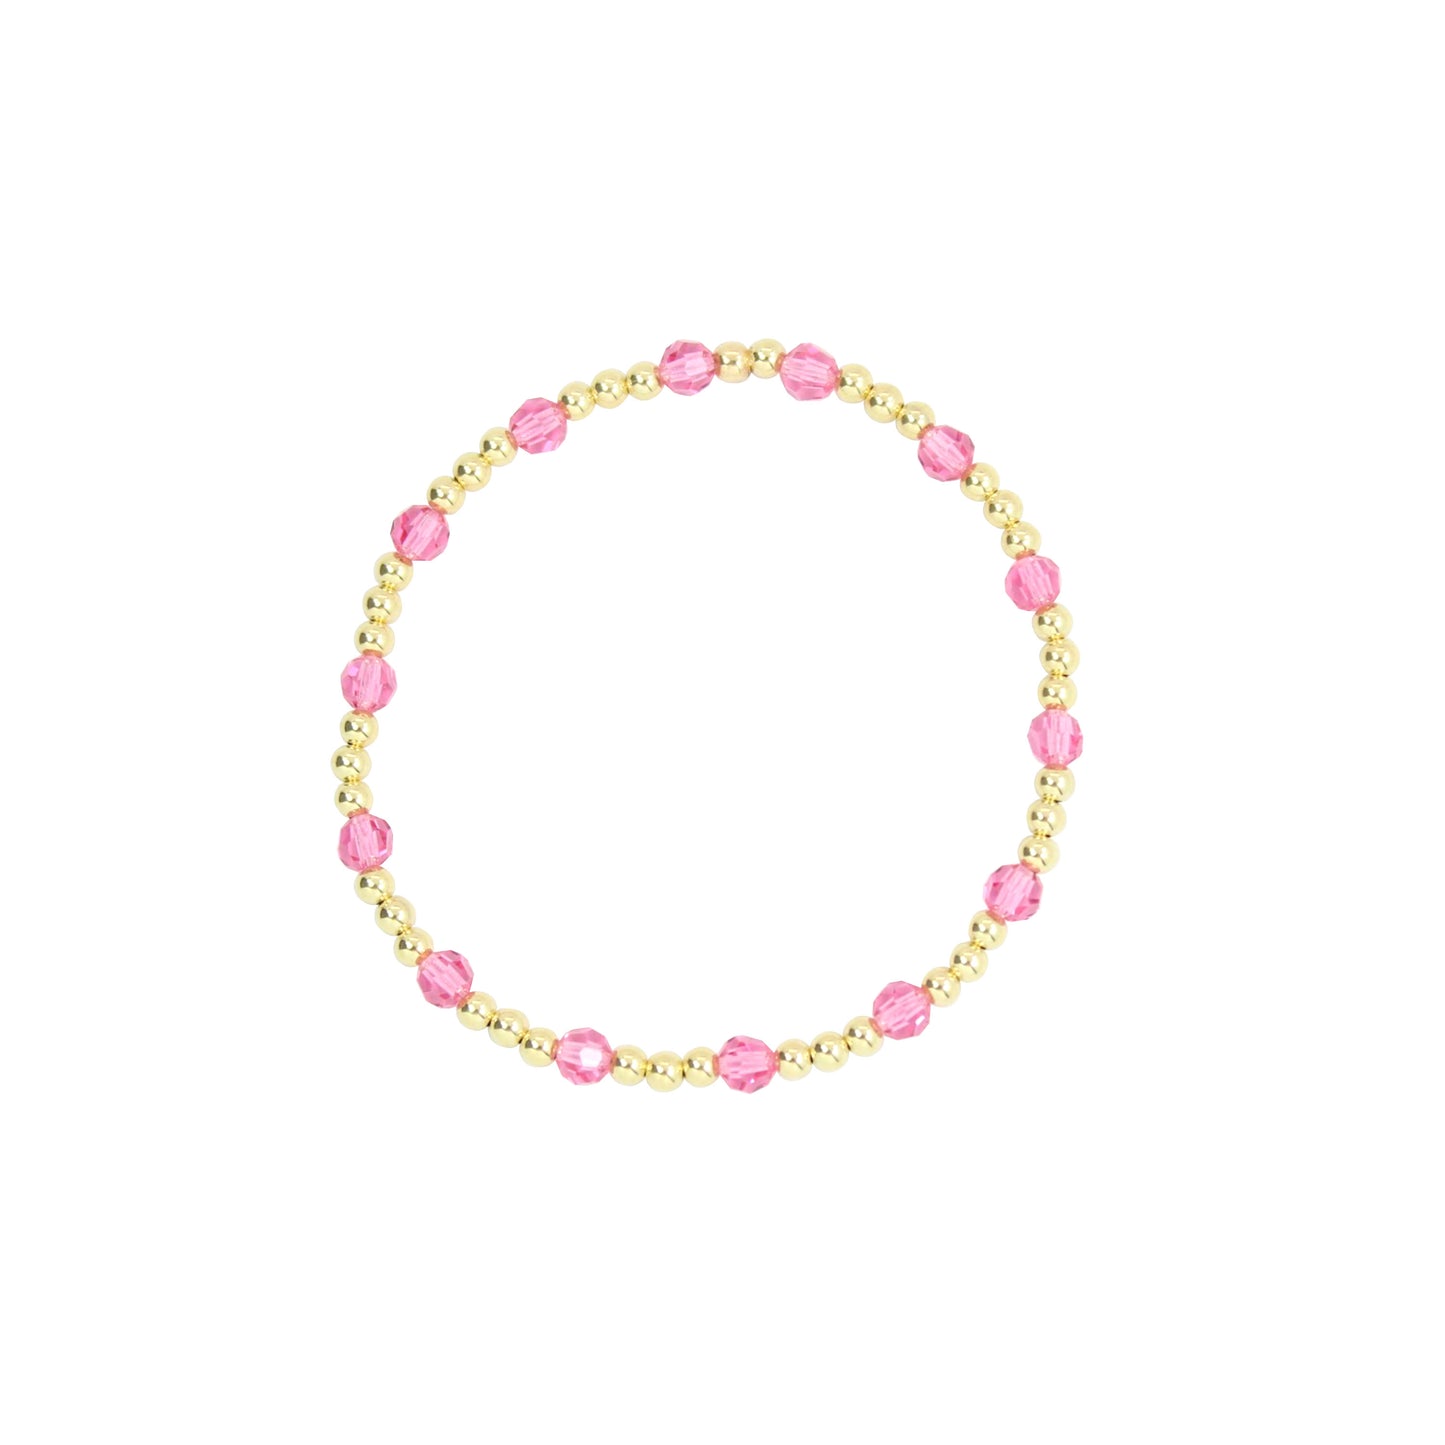 Stretchy October Birthstone Adult Dotted Bracelet (3MM + 4MM beads)